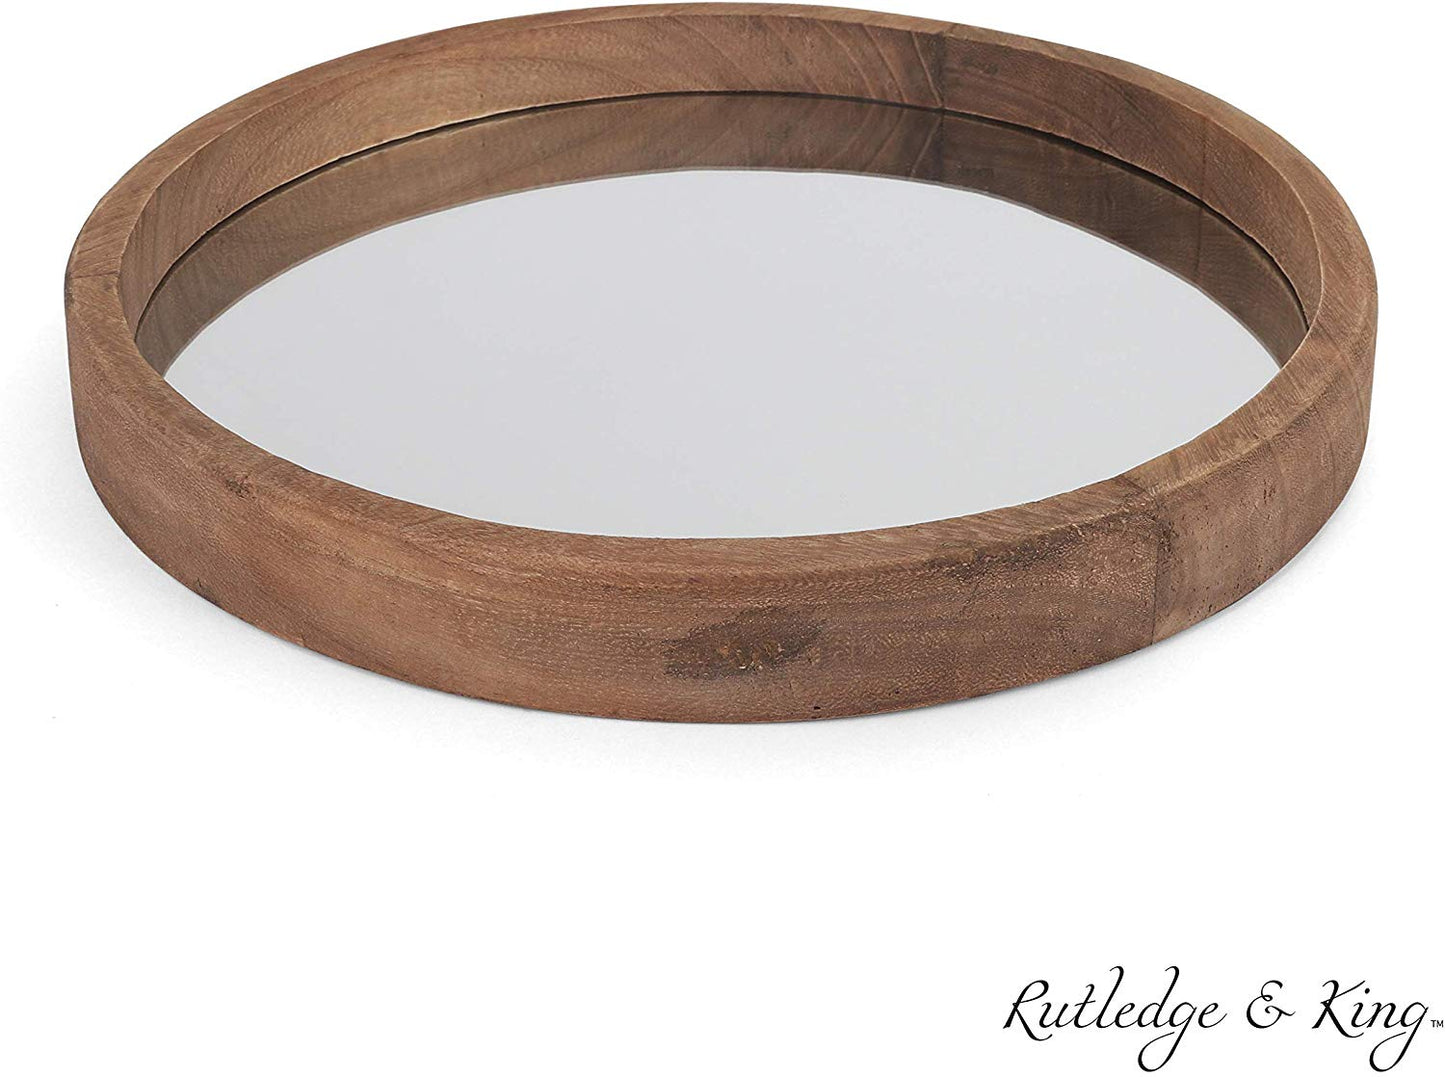 Midwood Wooden Mirror - Extra Large